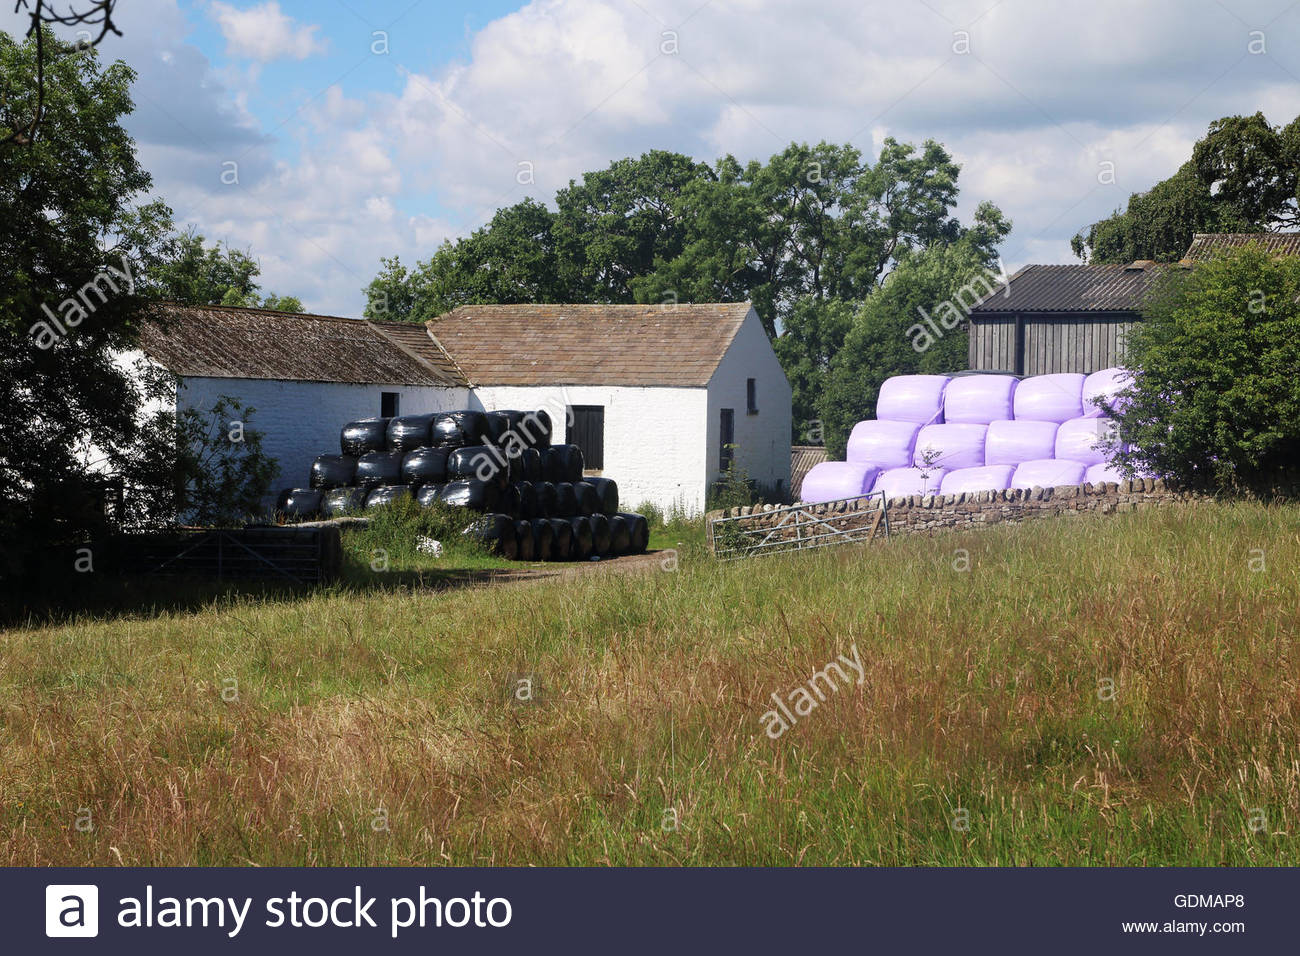 Purple Silage Bales Stock Photos & Purple Silage Bales Stock ...